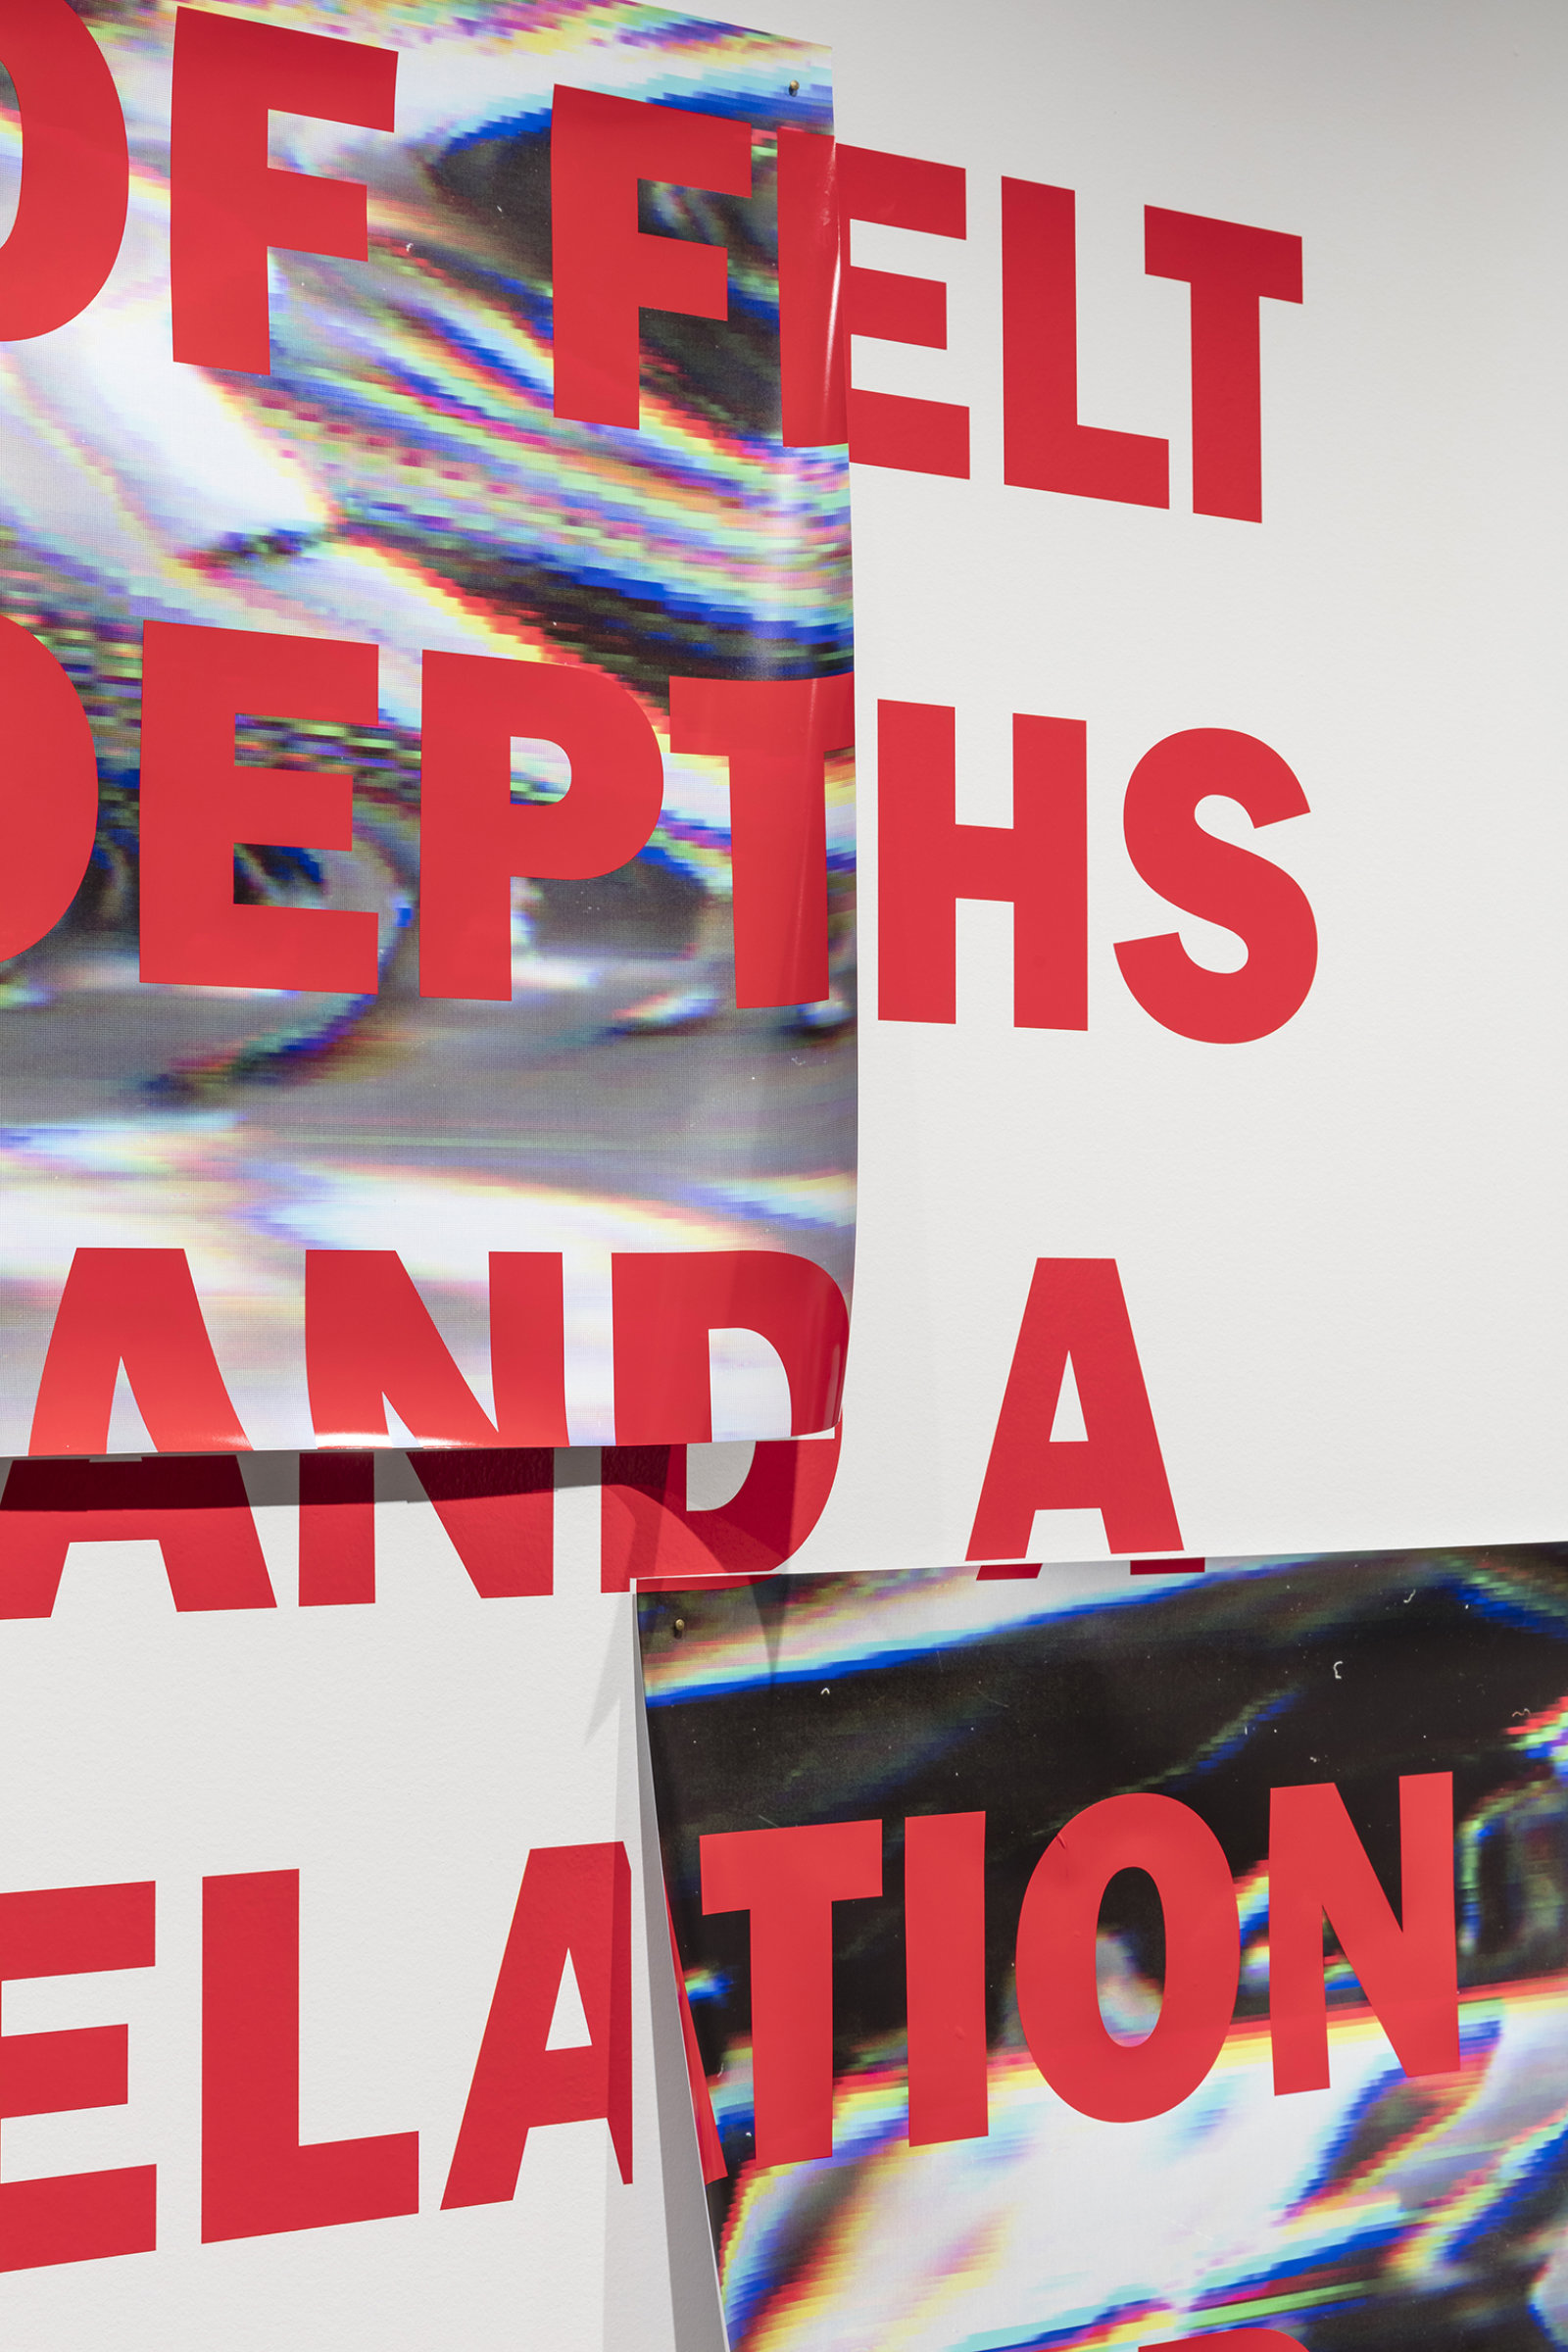 Raymond Boisjoly, Of felt depths and a relation beyond (detail), 2016, vinyl lettering on solvent based inkjet print on vinyl, 63 x 102 in. (160 x 258 cm). Installation view, Over a Distance Between One and Many, Koffler Gallery, Toronto, ON, 2016